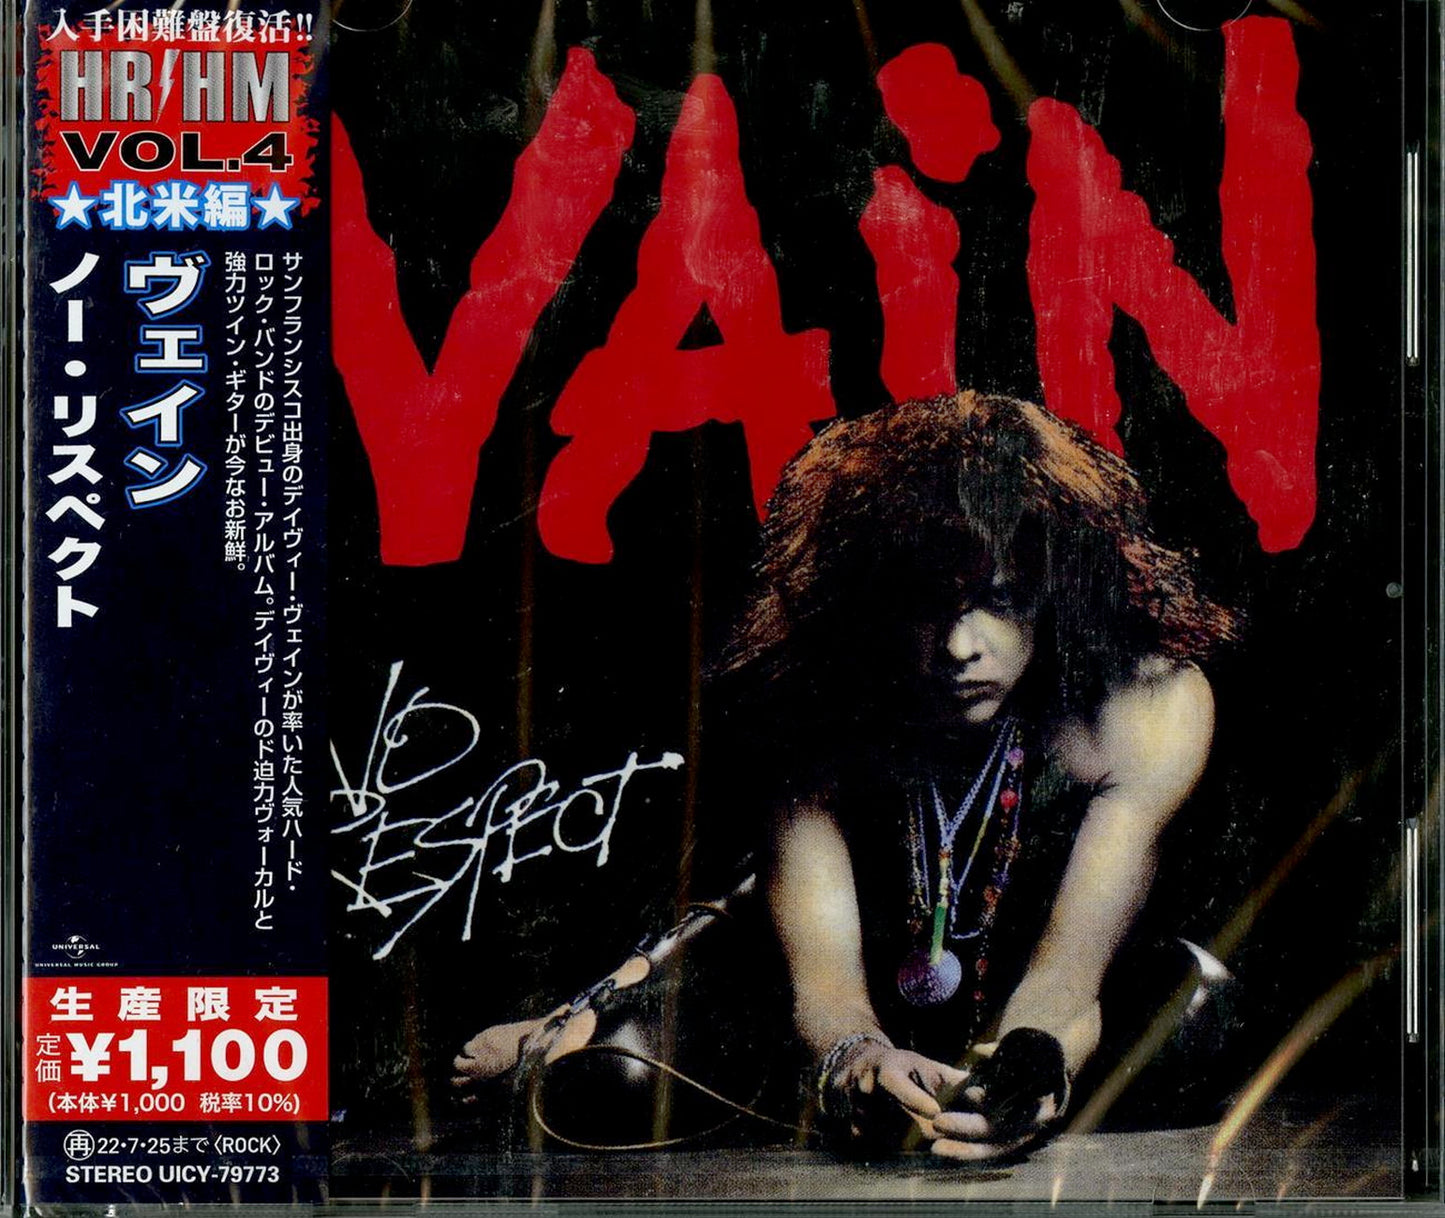 Vain - No Respect - Japan  CD Limited Edition